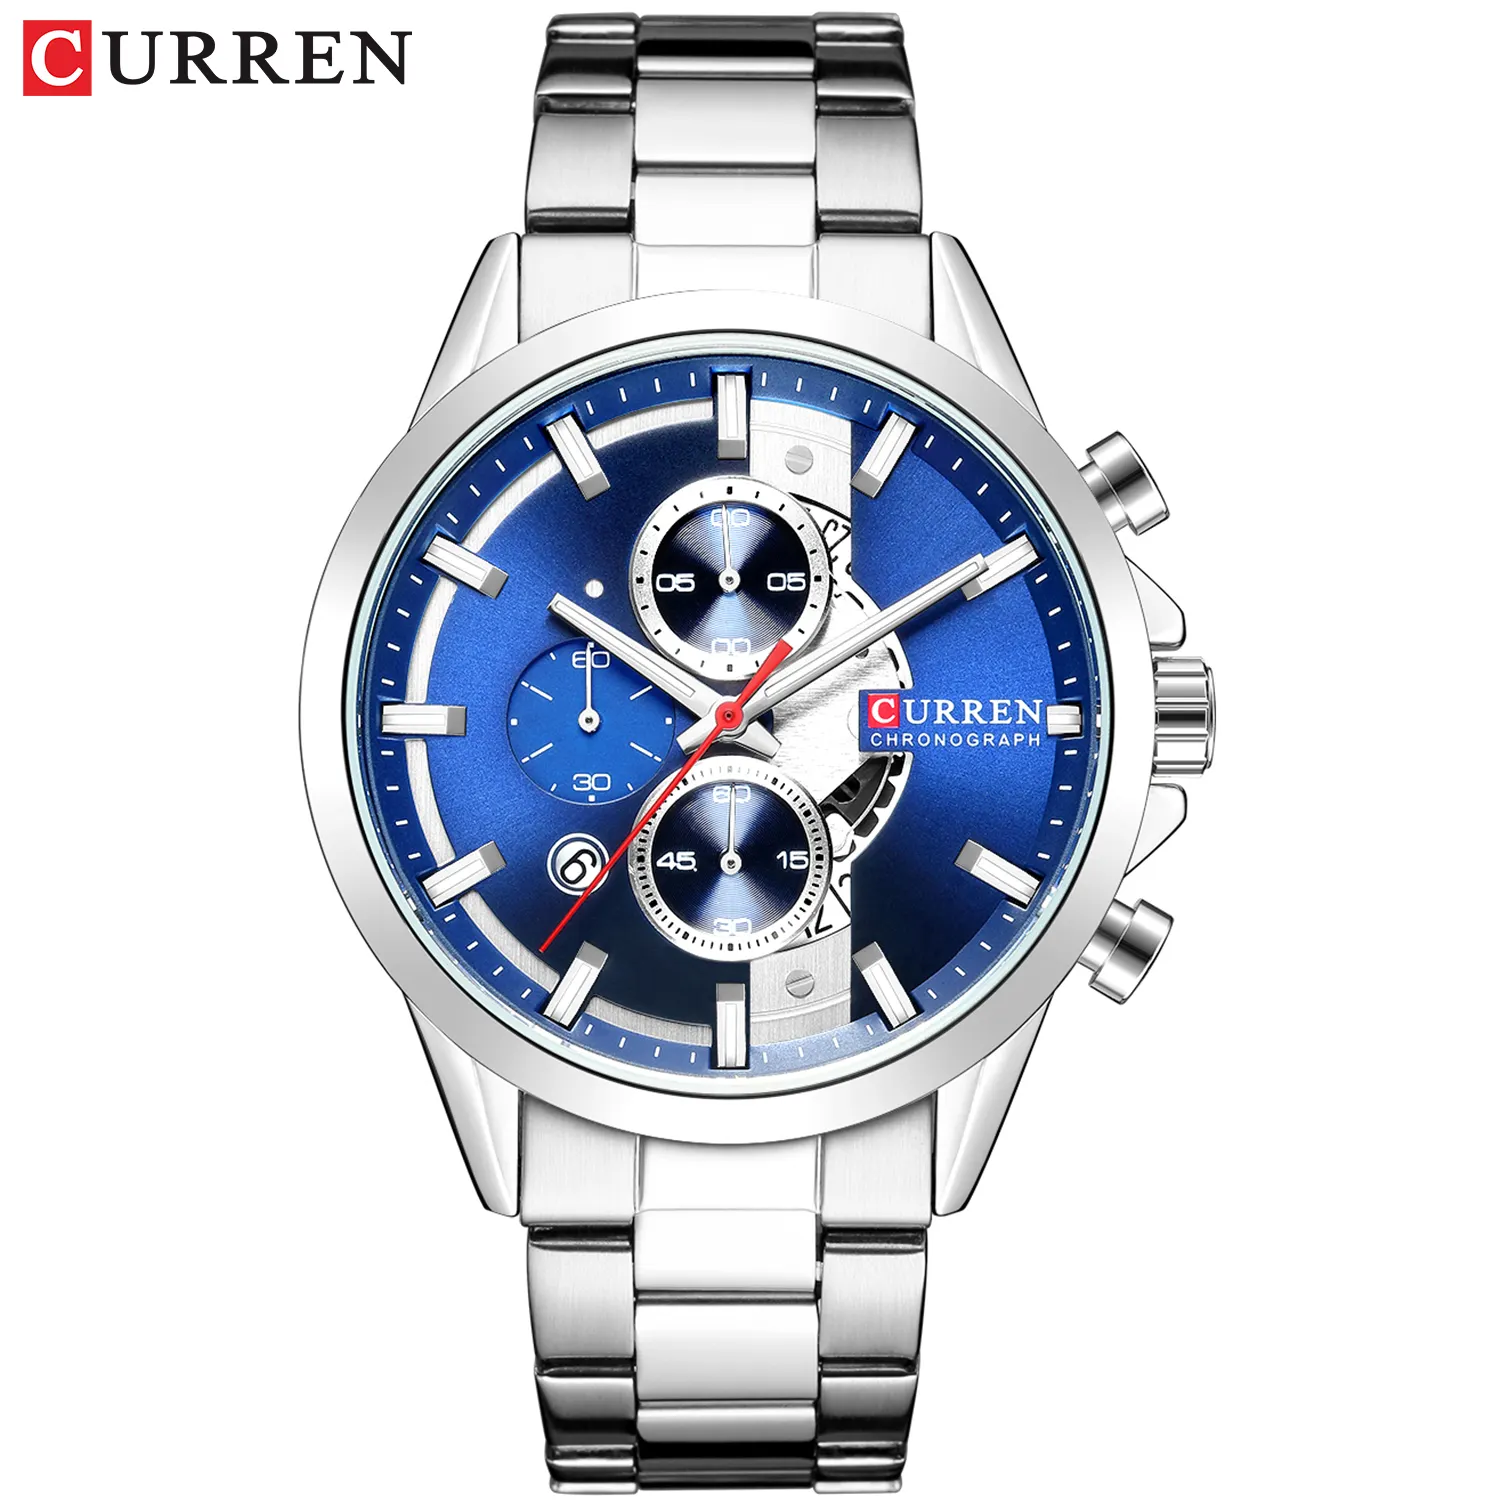 CURREN 8325 Man Watches Modern Quartz Stainless Steel Chronograph Clock Fashion Casual Wristwatches for Male